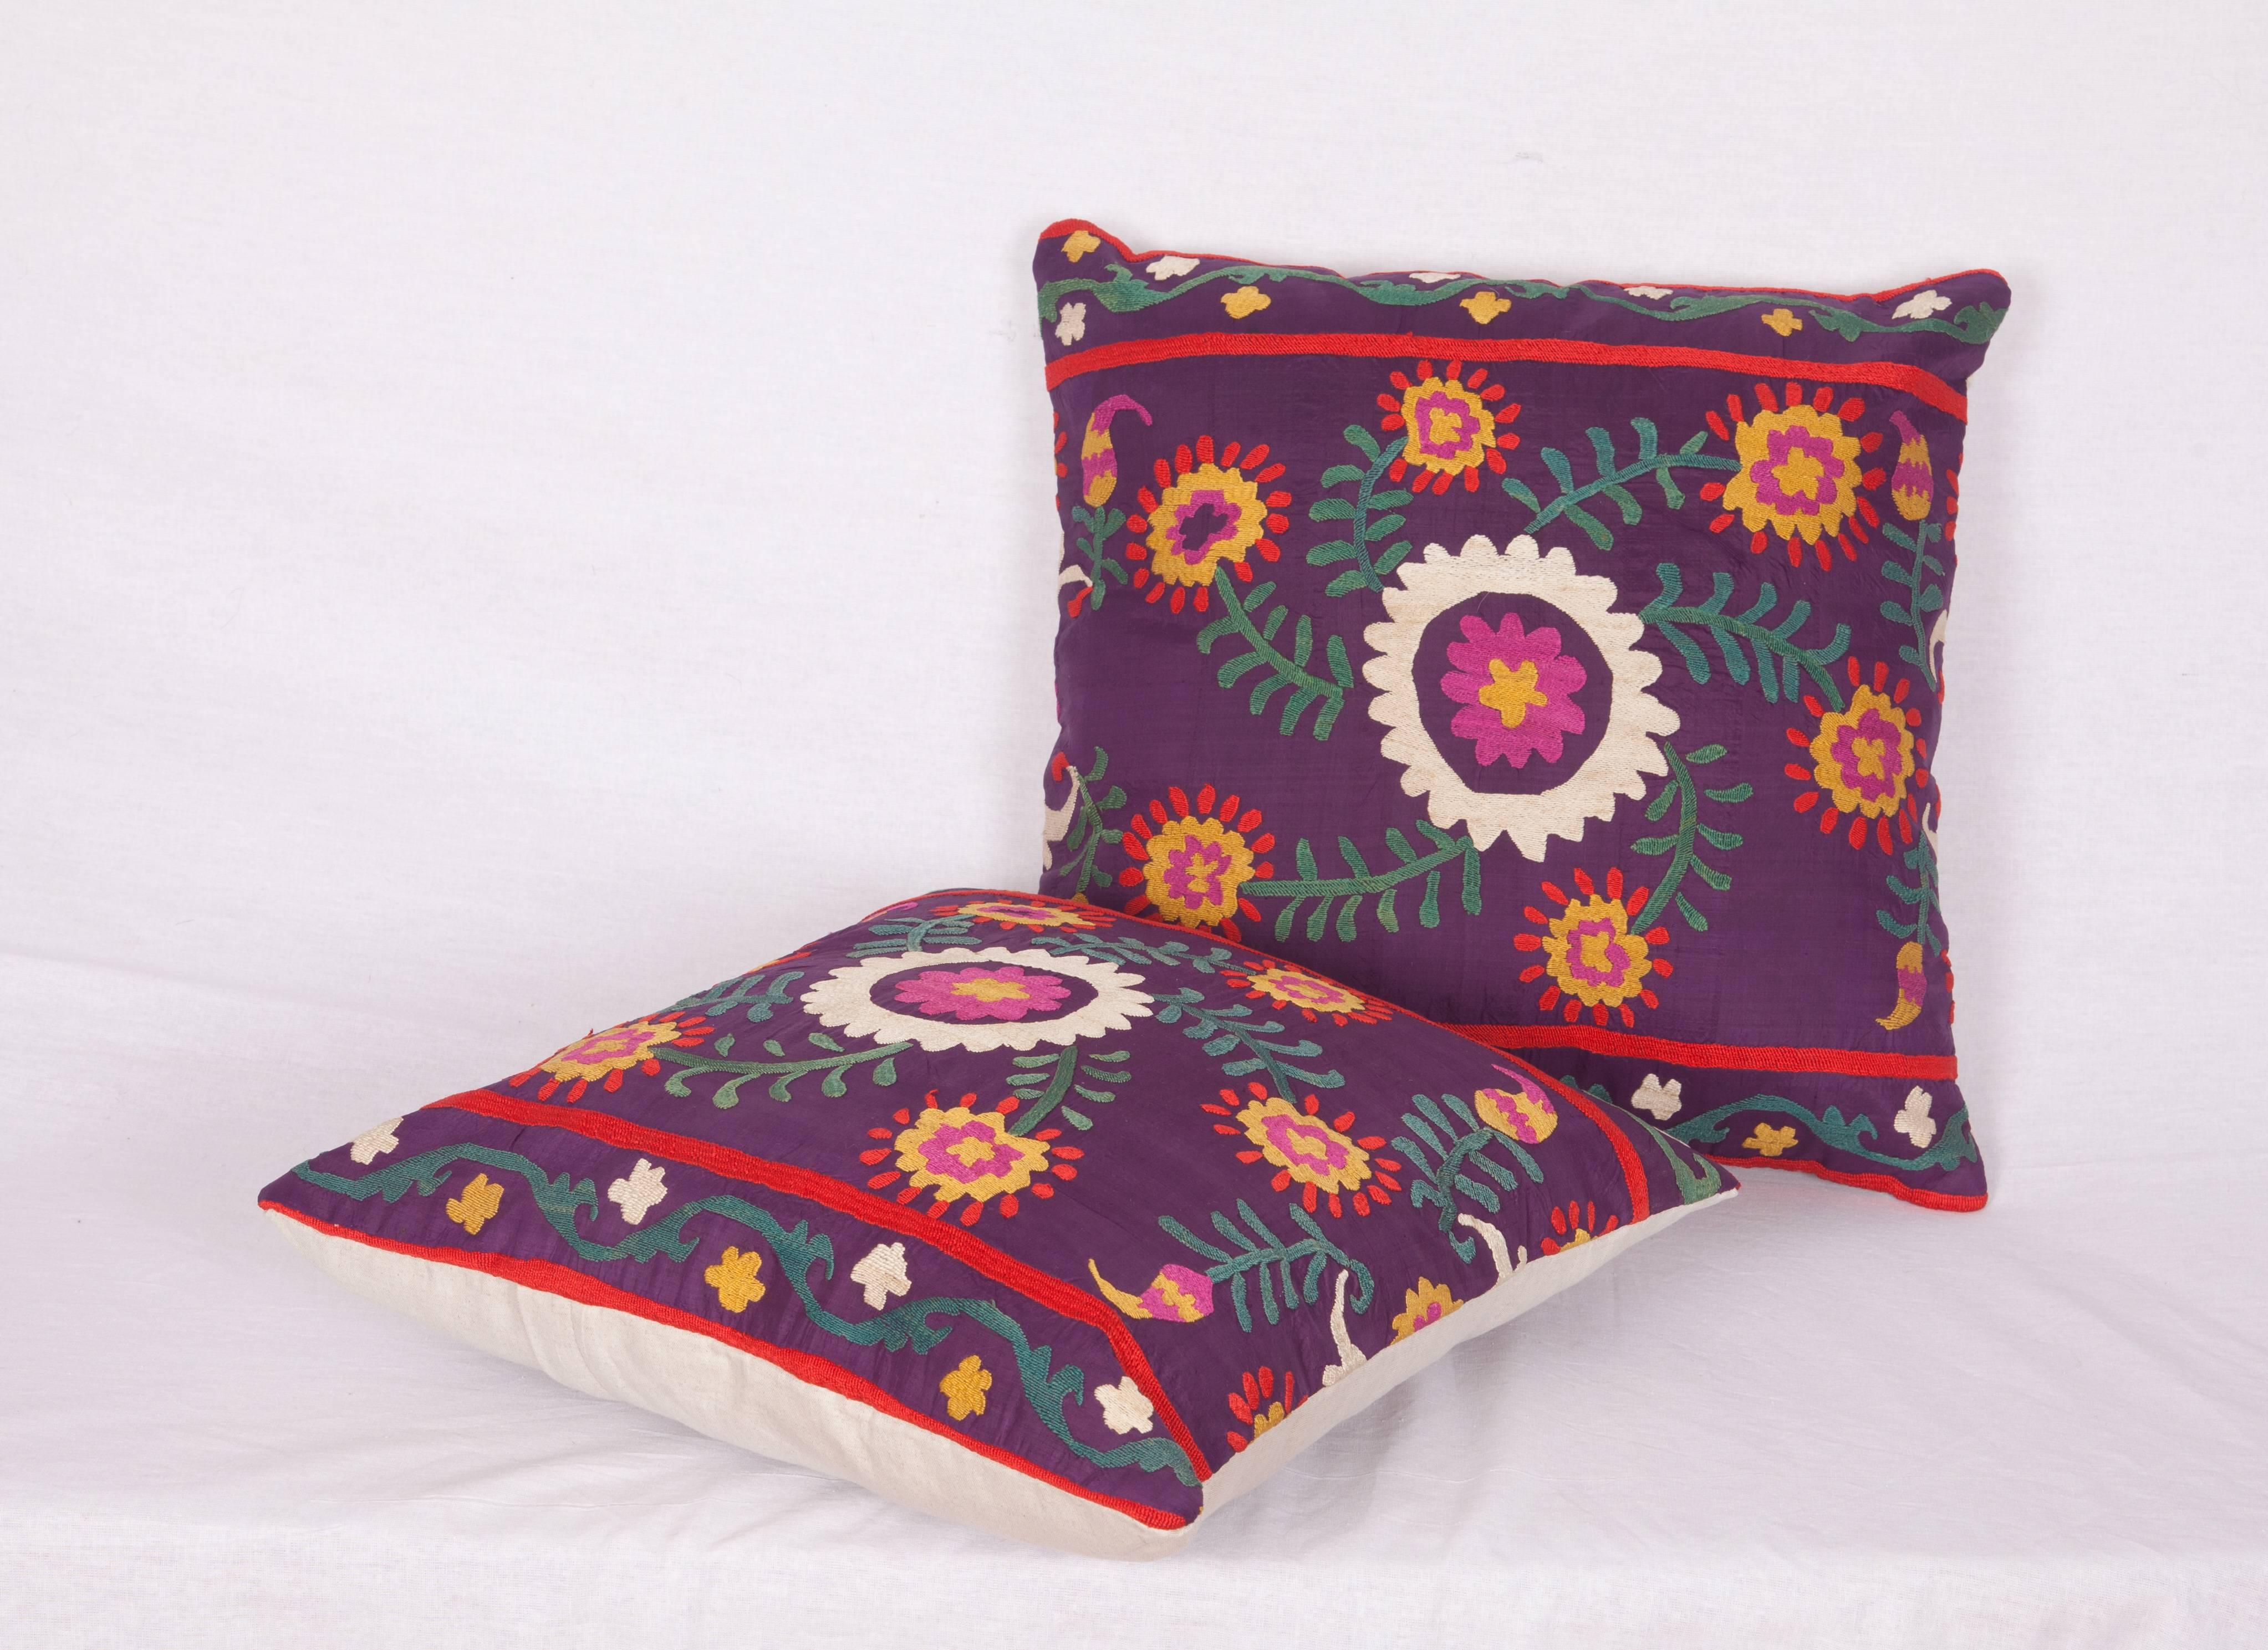 Embroidered Antique Pillow Made Out of an Early 20th Century Uzbek Samarkand Silk Suzani